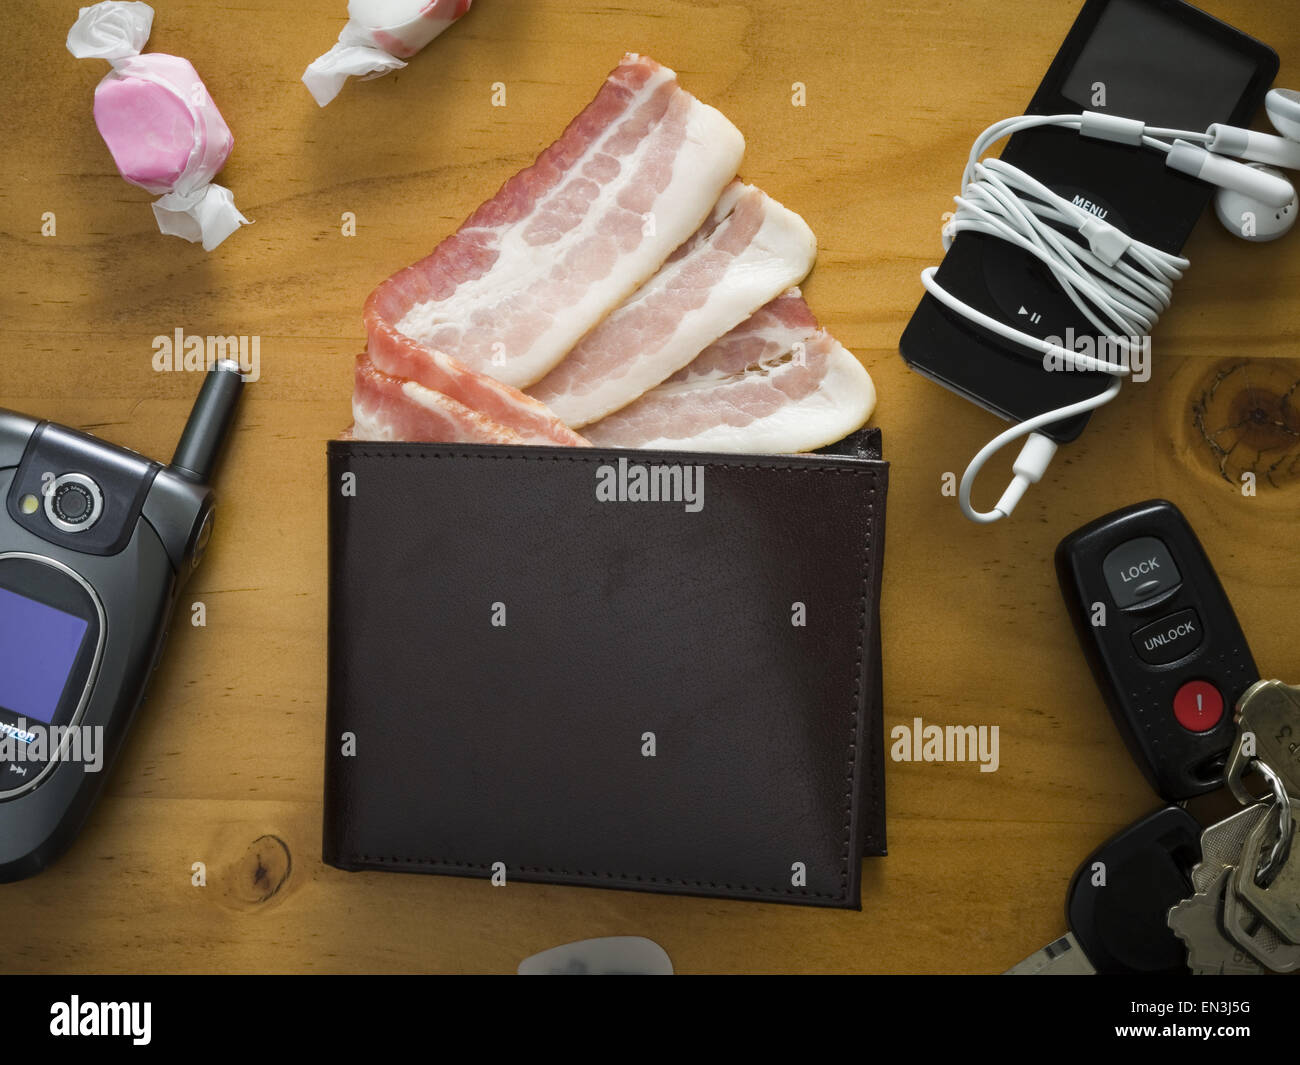 Billfold with strips of bacon Stock Photo